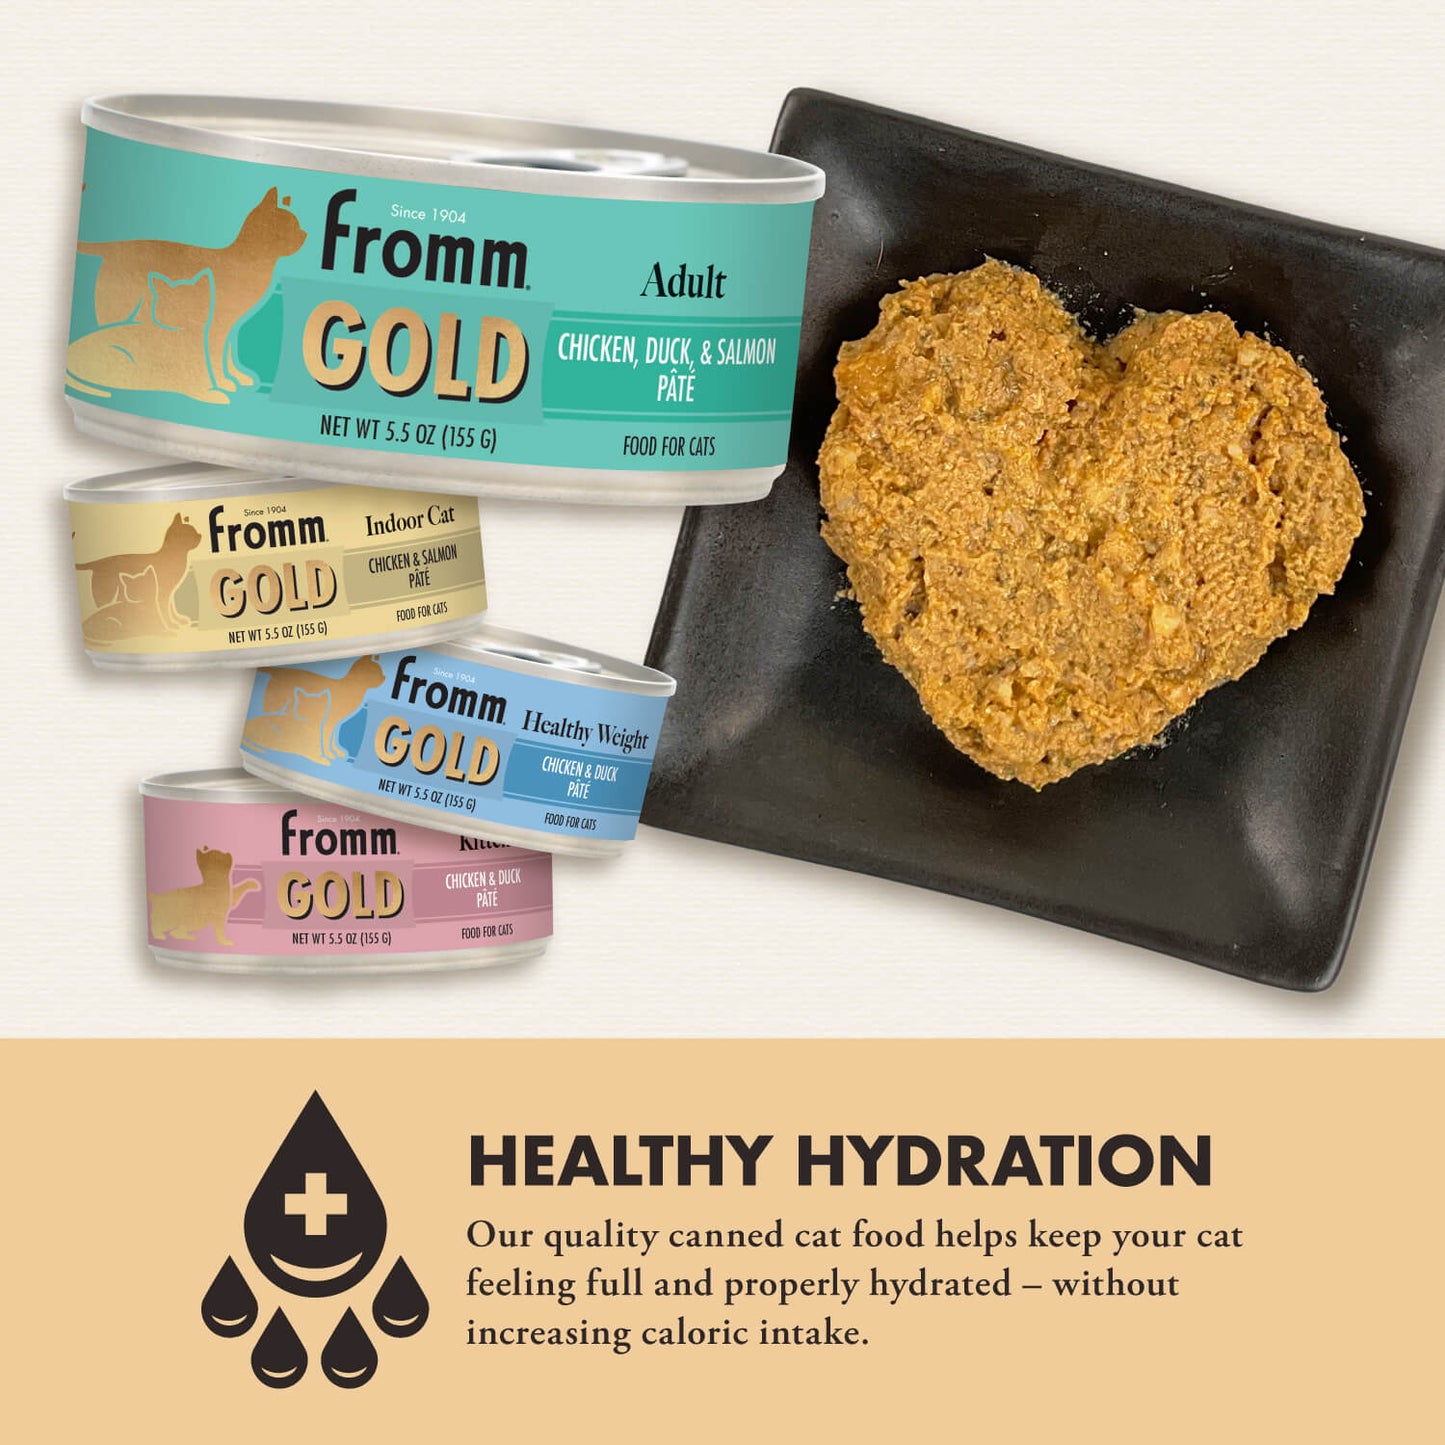 Fromm Gold Adult Chicken, Duck, & Salmon Pate for Cats